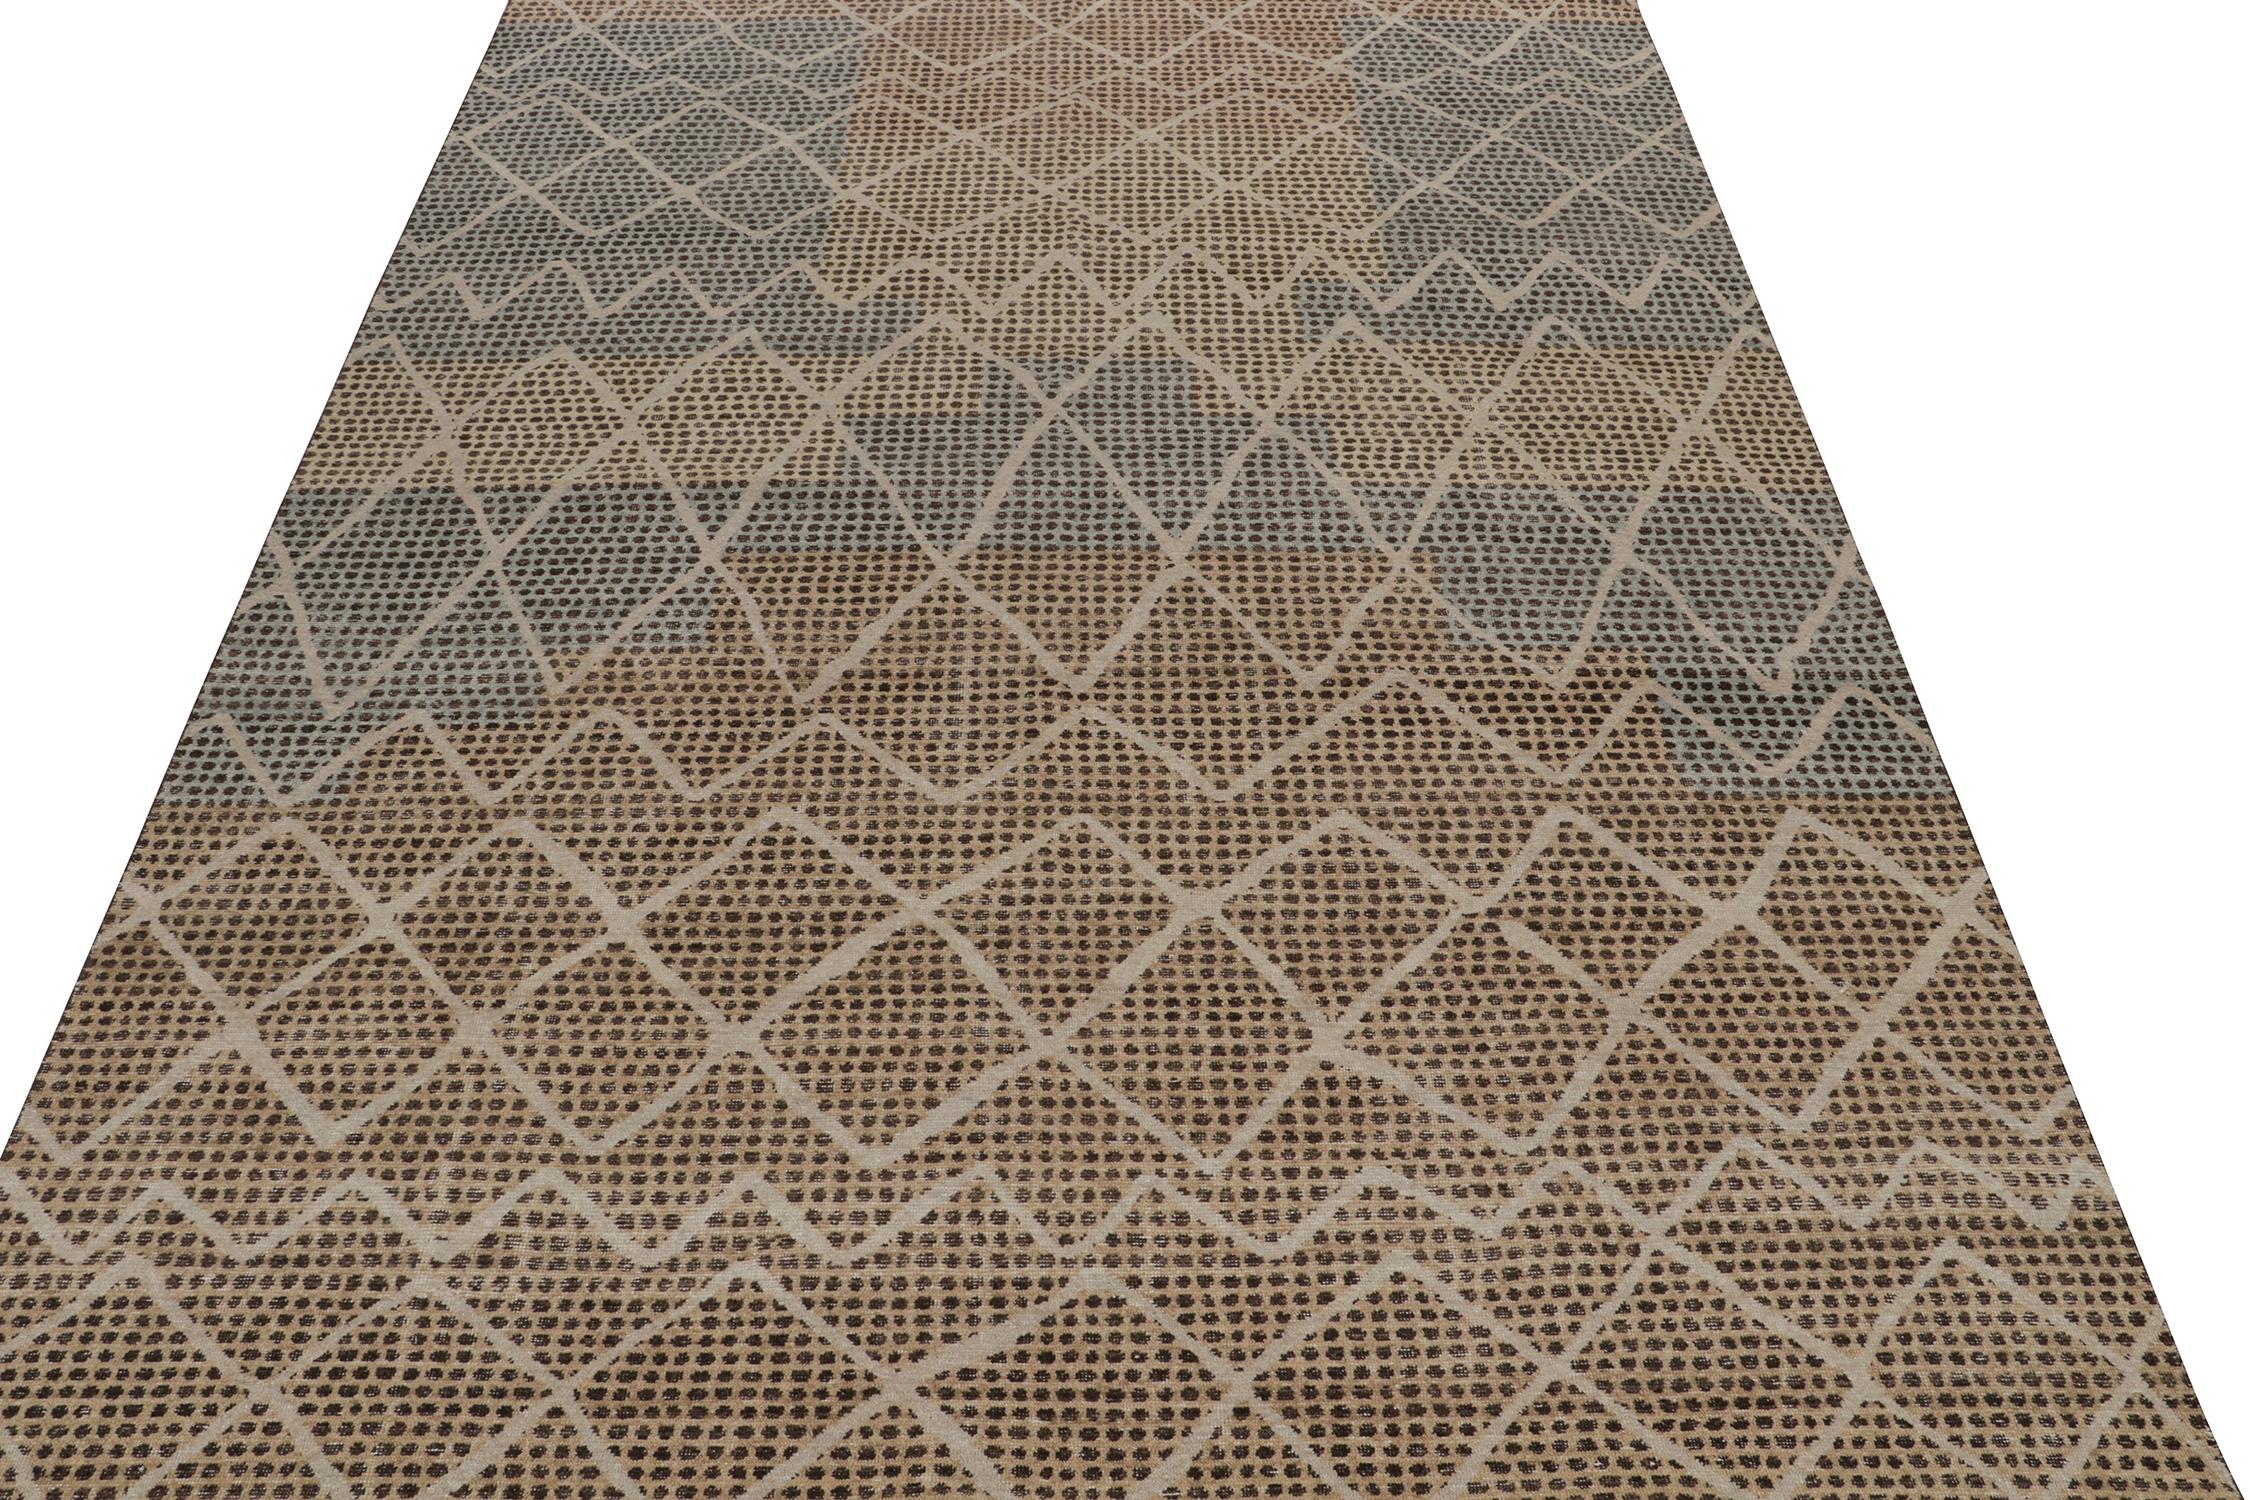 This 10x14 rug is a bold new addition to the Homage Collection by Rug & Kilim. Hand-knotted in wool and cotton, this piece recaptures antique Berber Moroccan rugs in an inventive new Rustic Modern design. 

Further on the Design: 

This